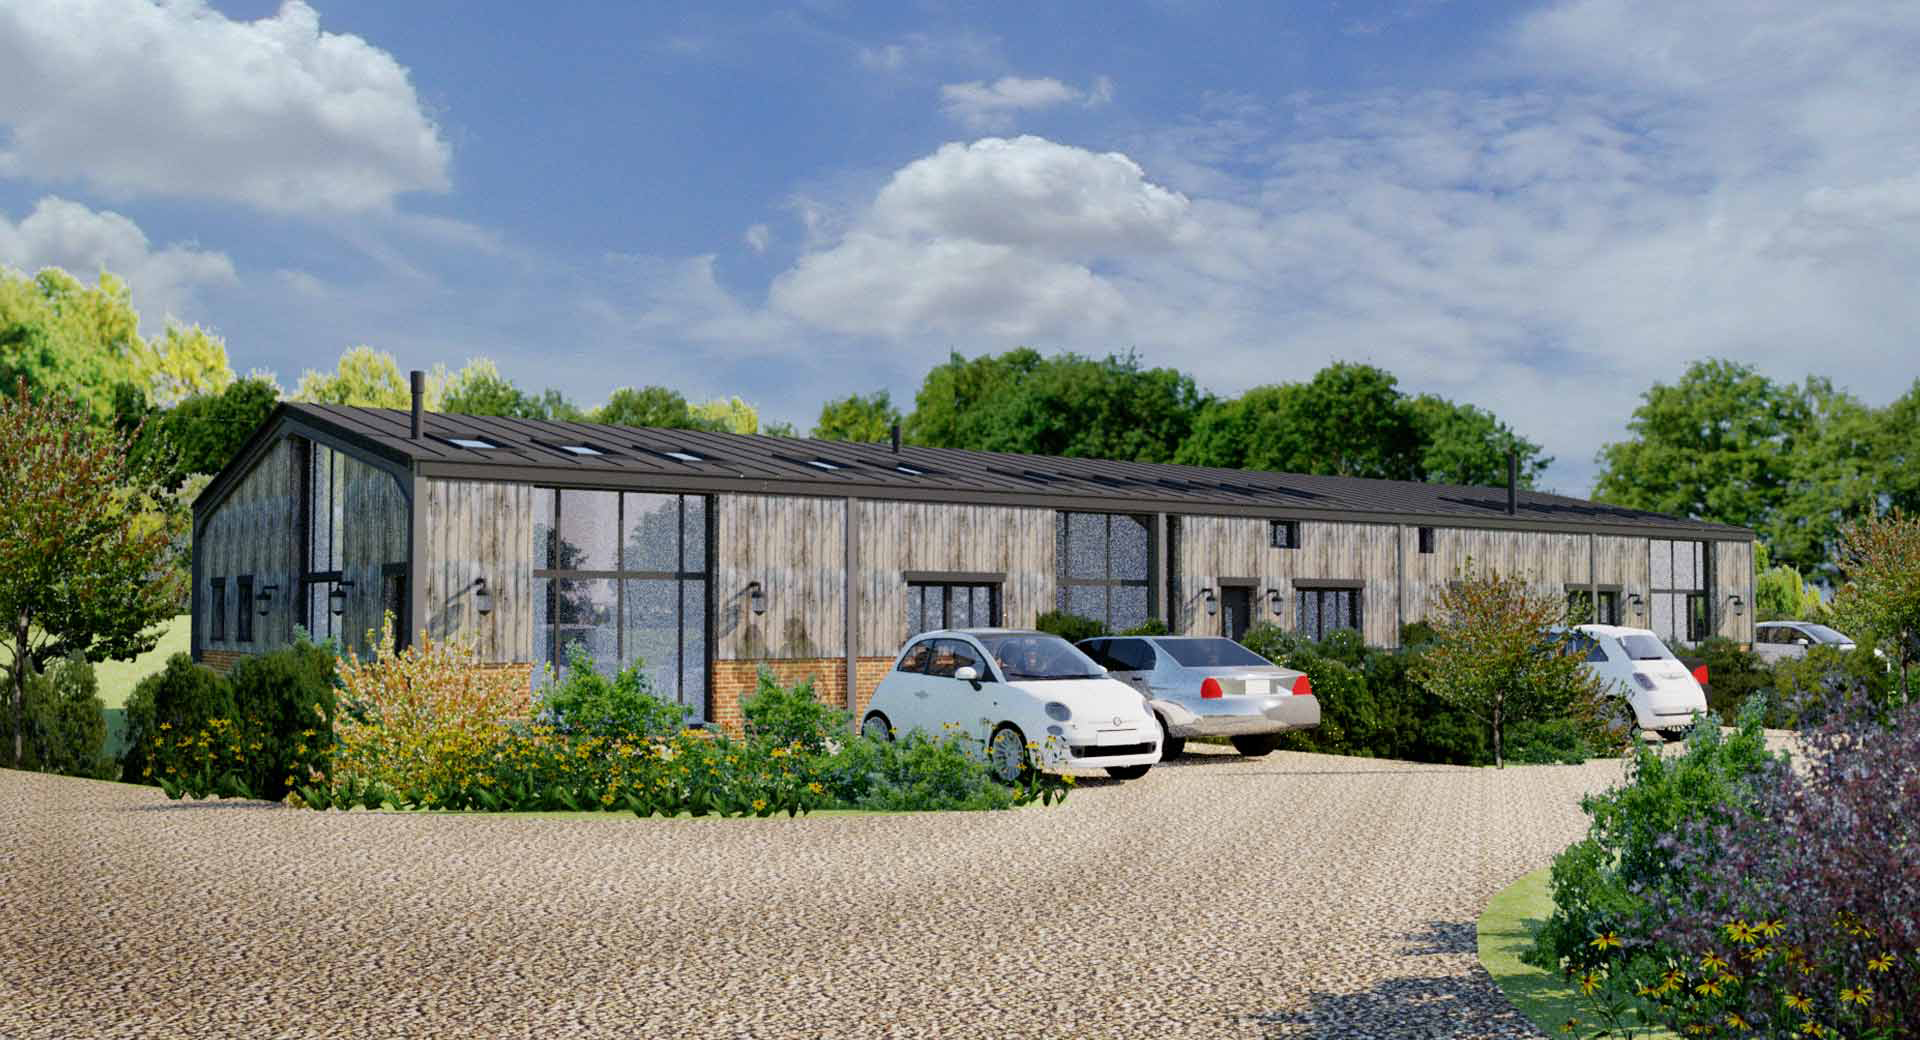 visual of class q barn conversion. Timber clad building